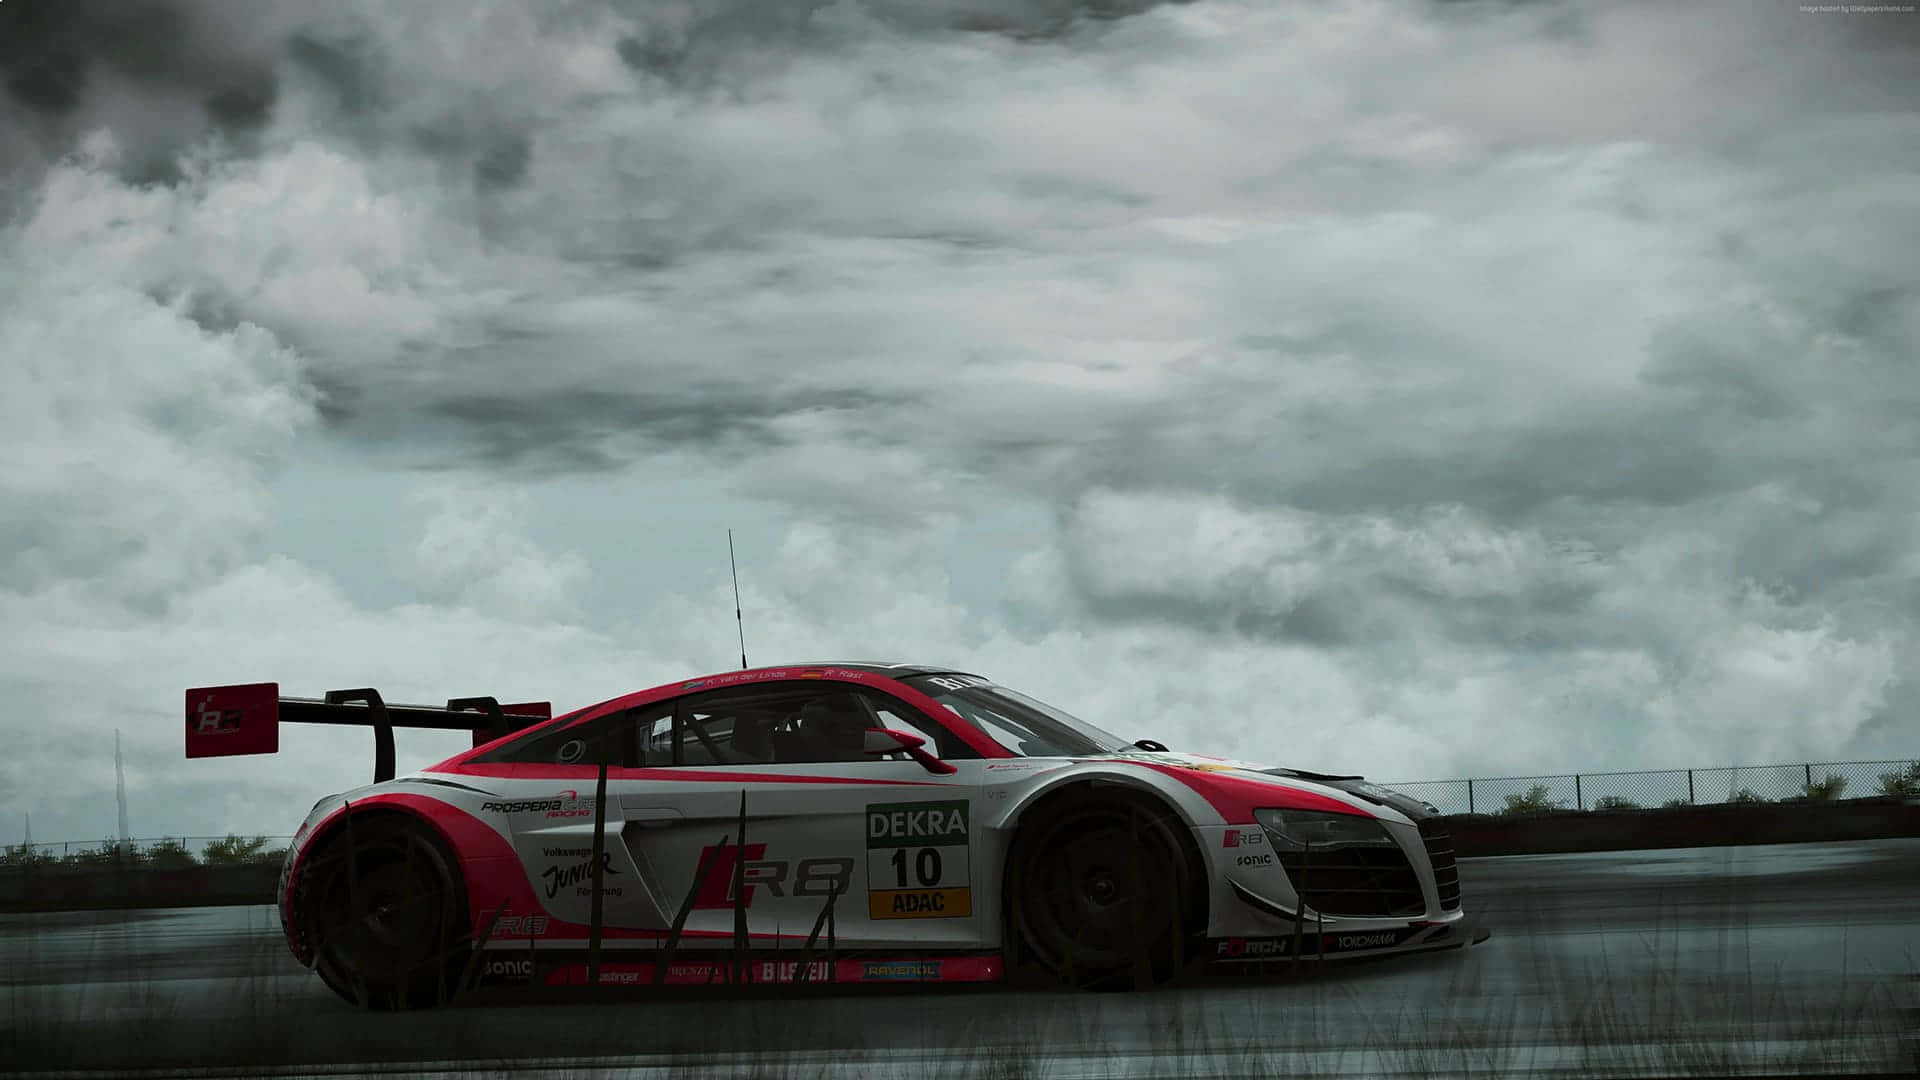 Hd Project Cars Audi R8 Lms (2016) Background